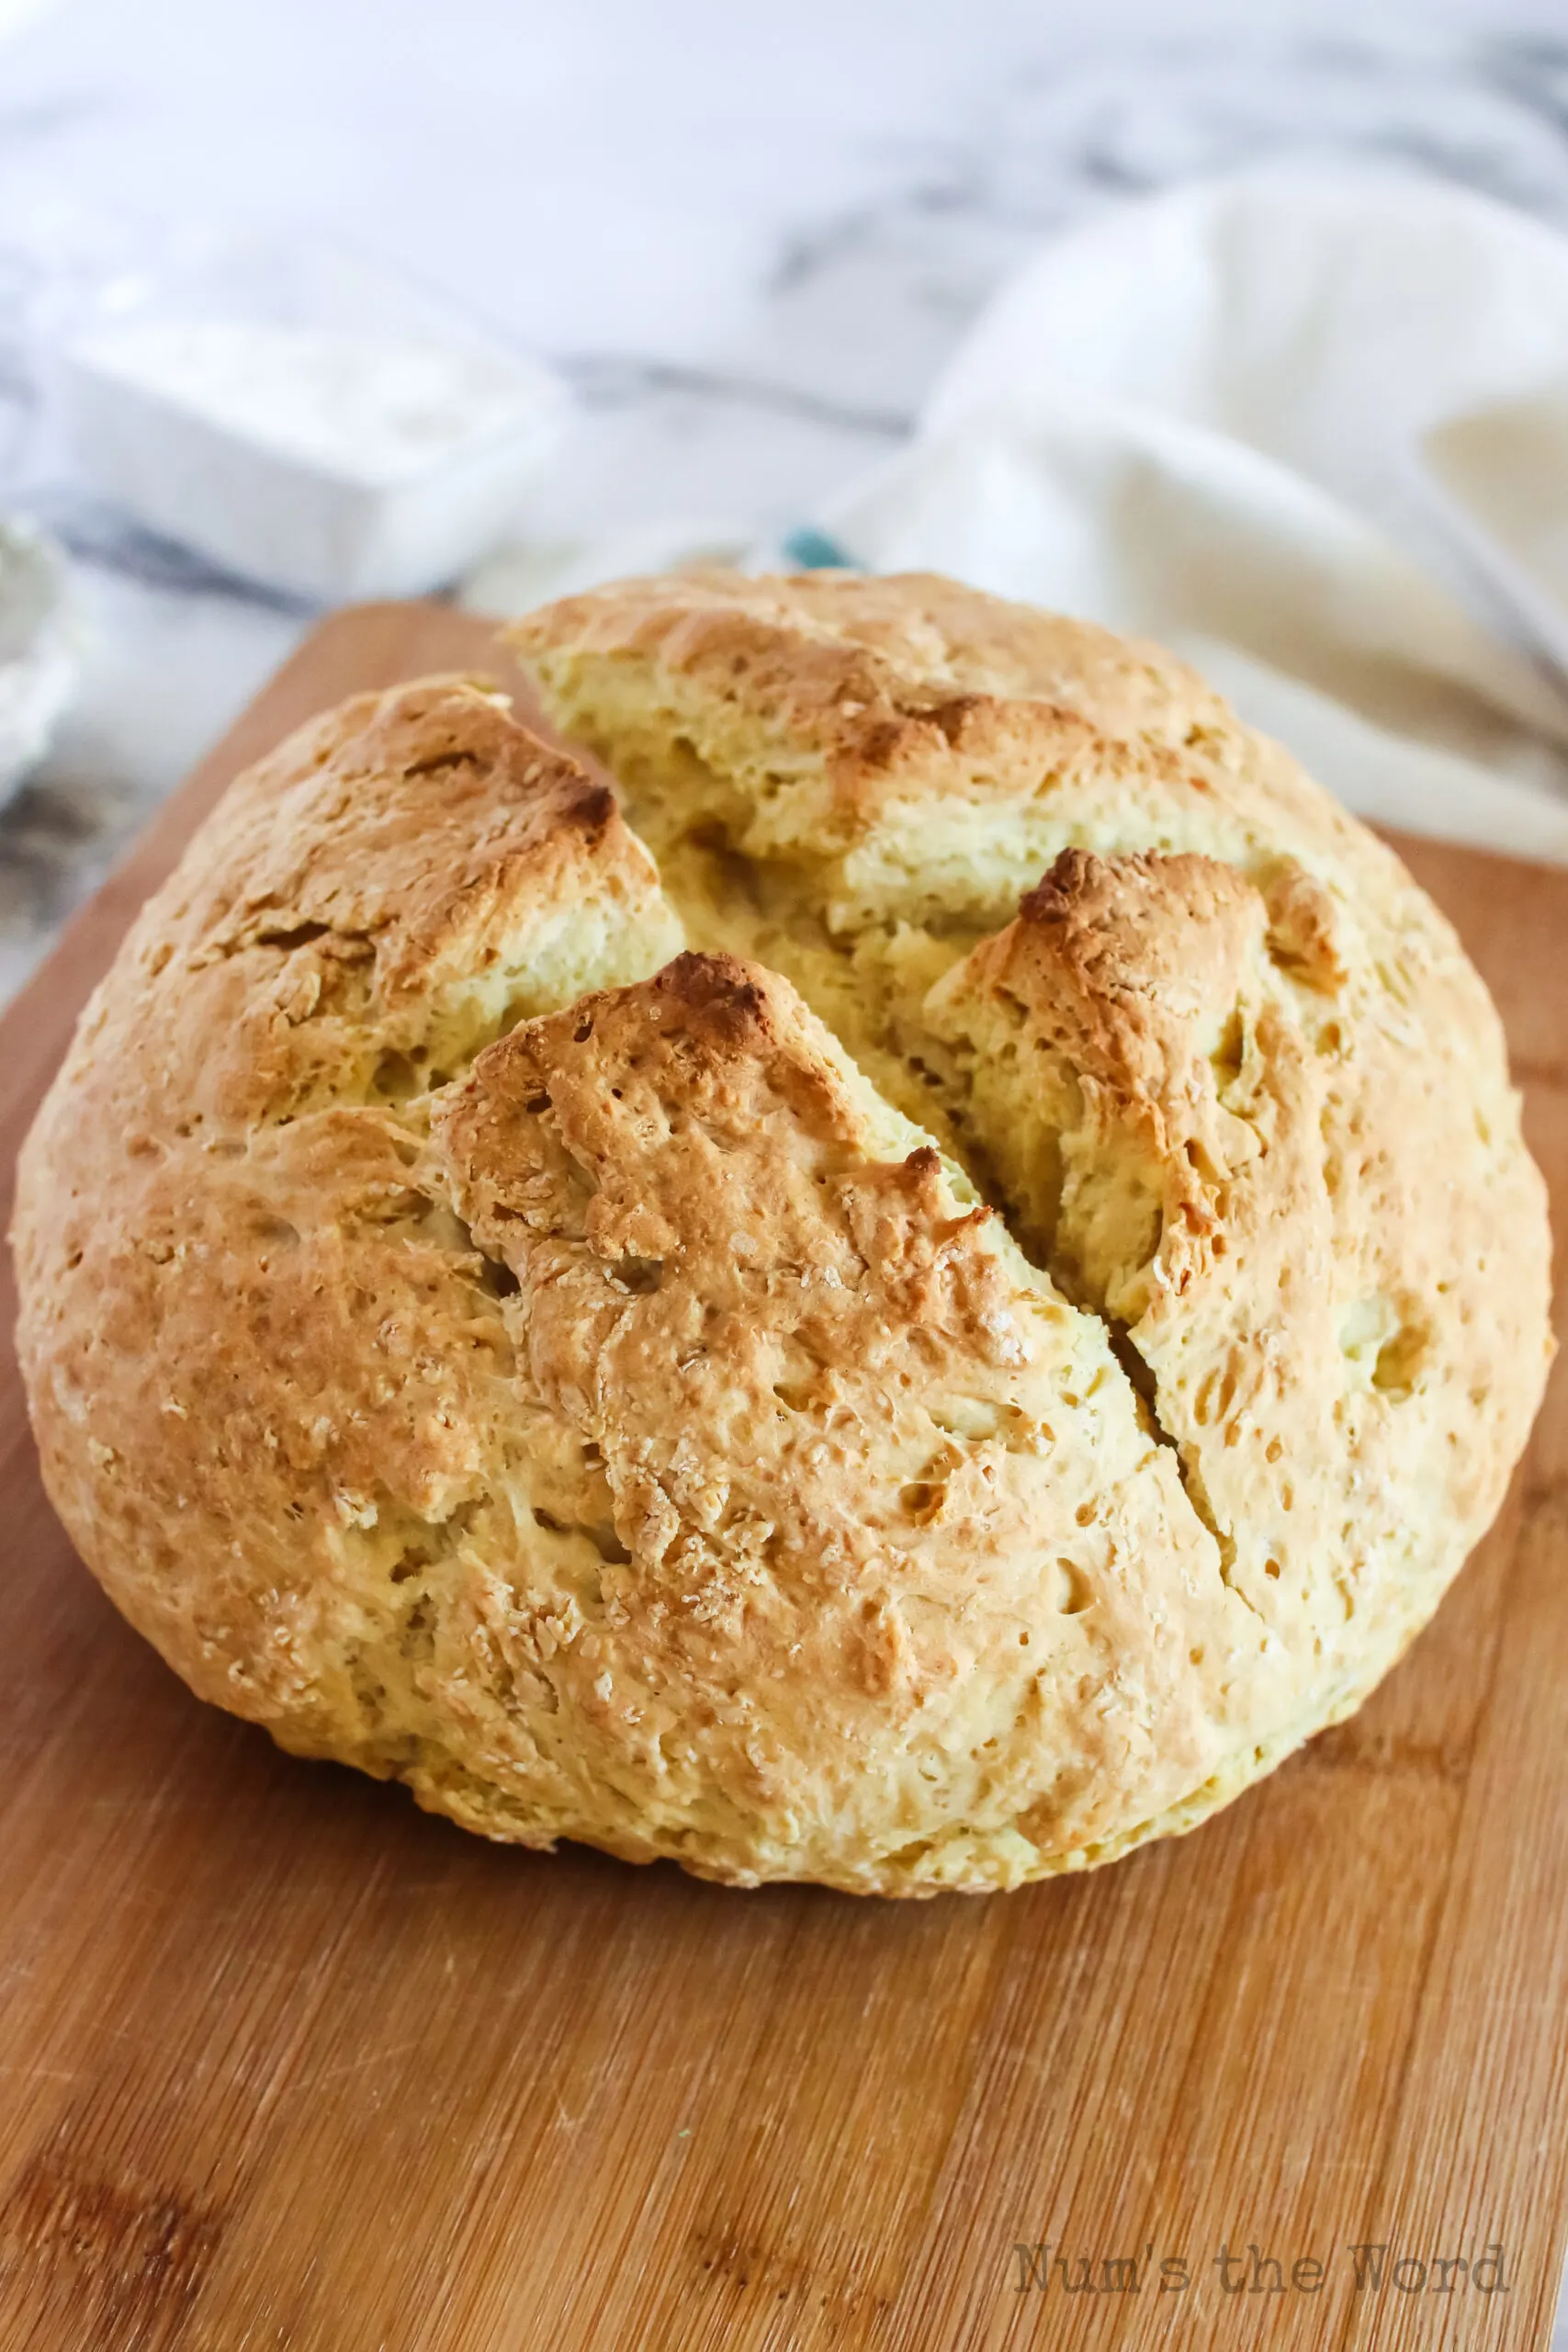 zoomed in image of soda bread. Photo taken from the side.